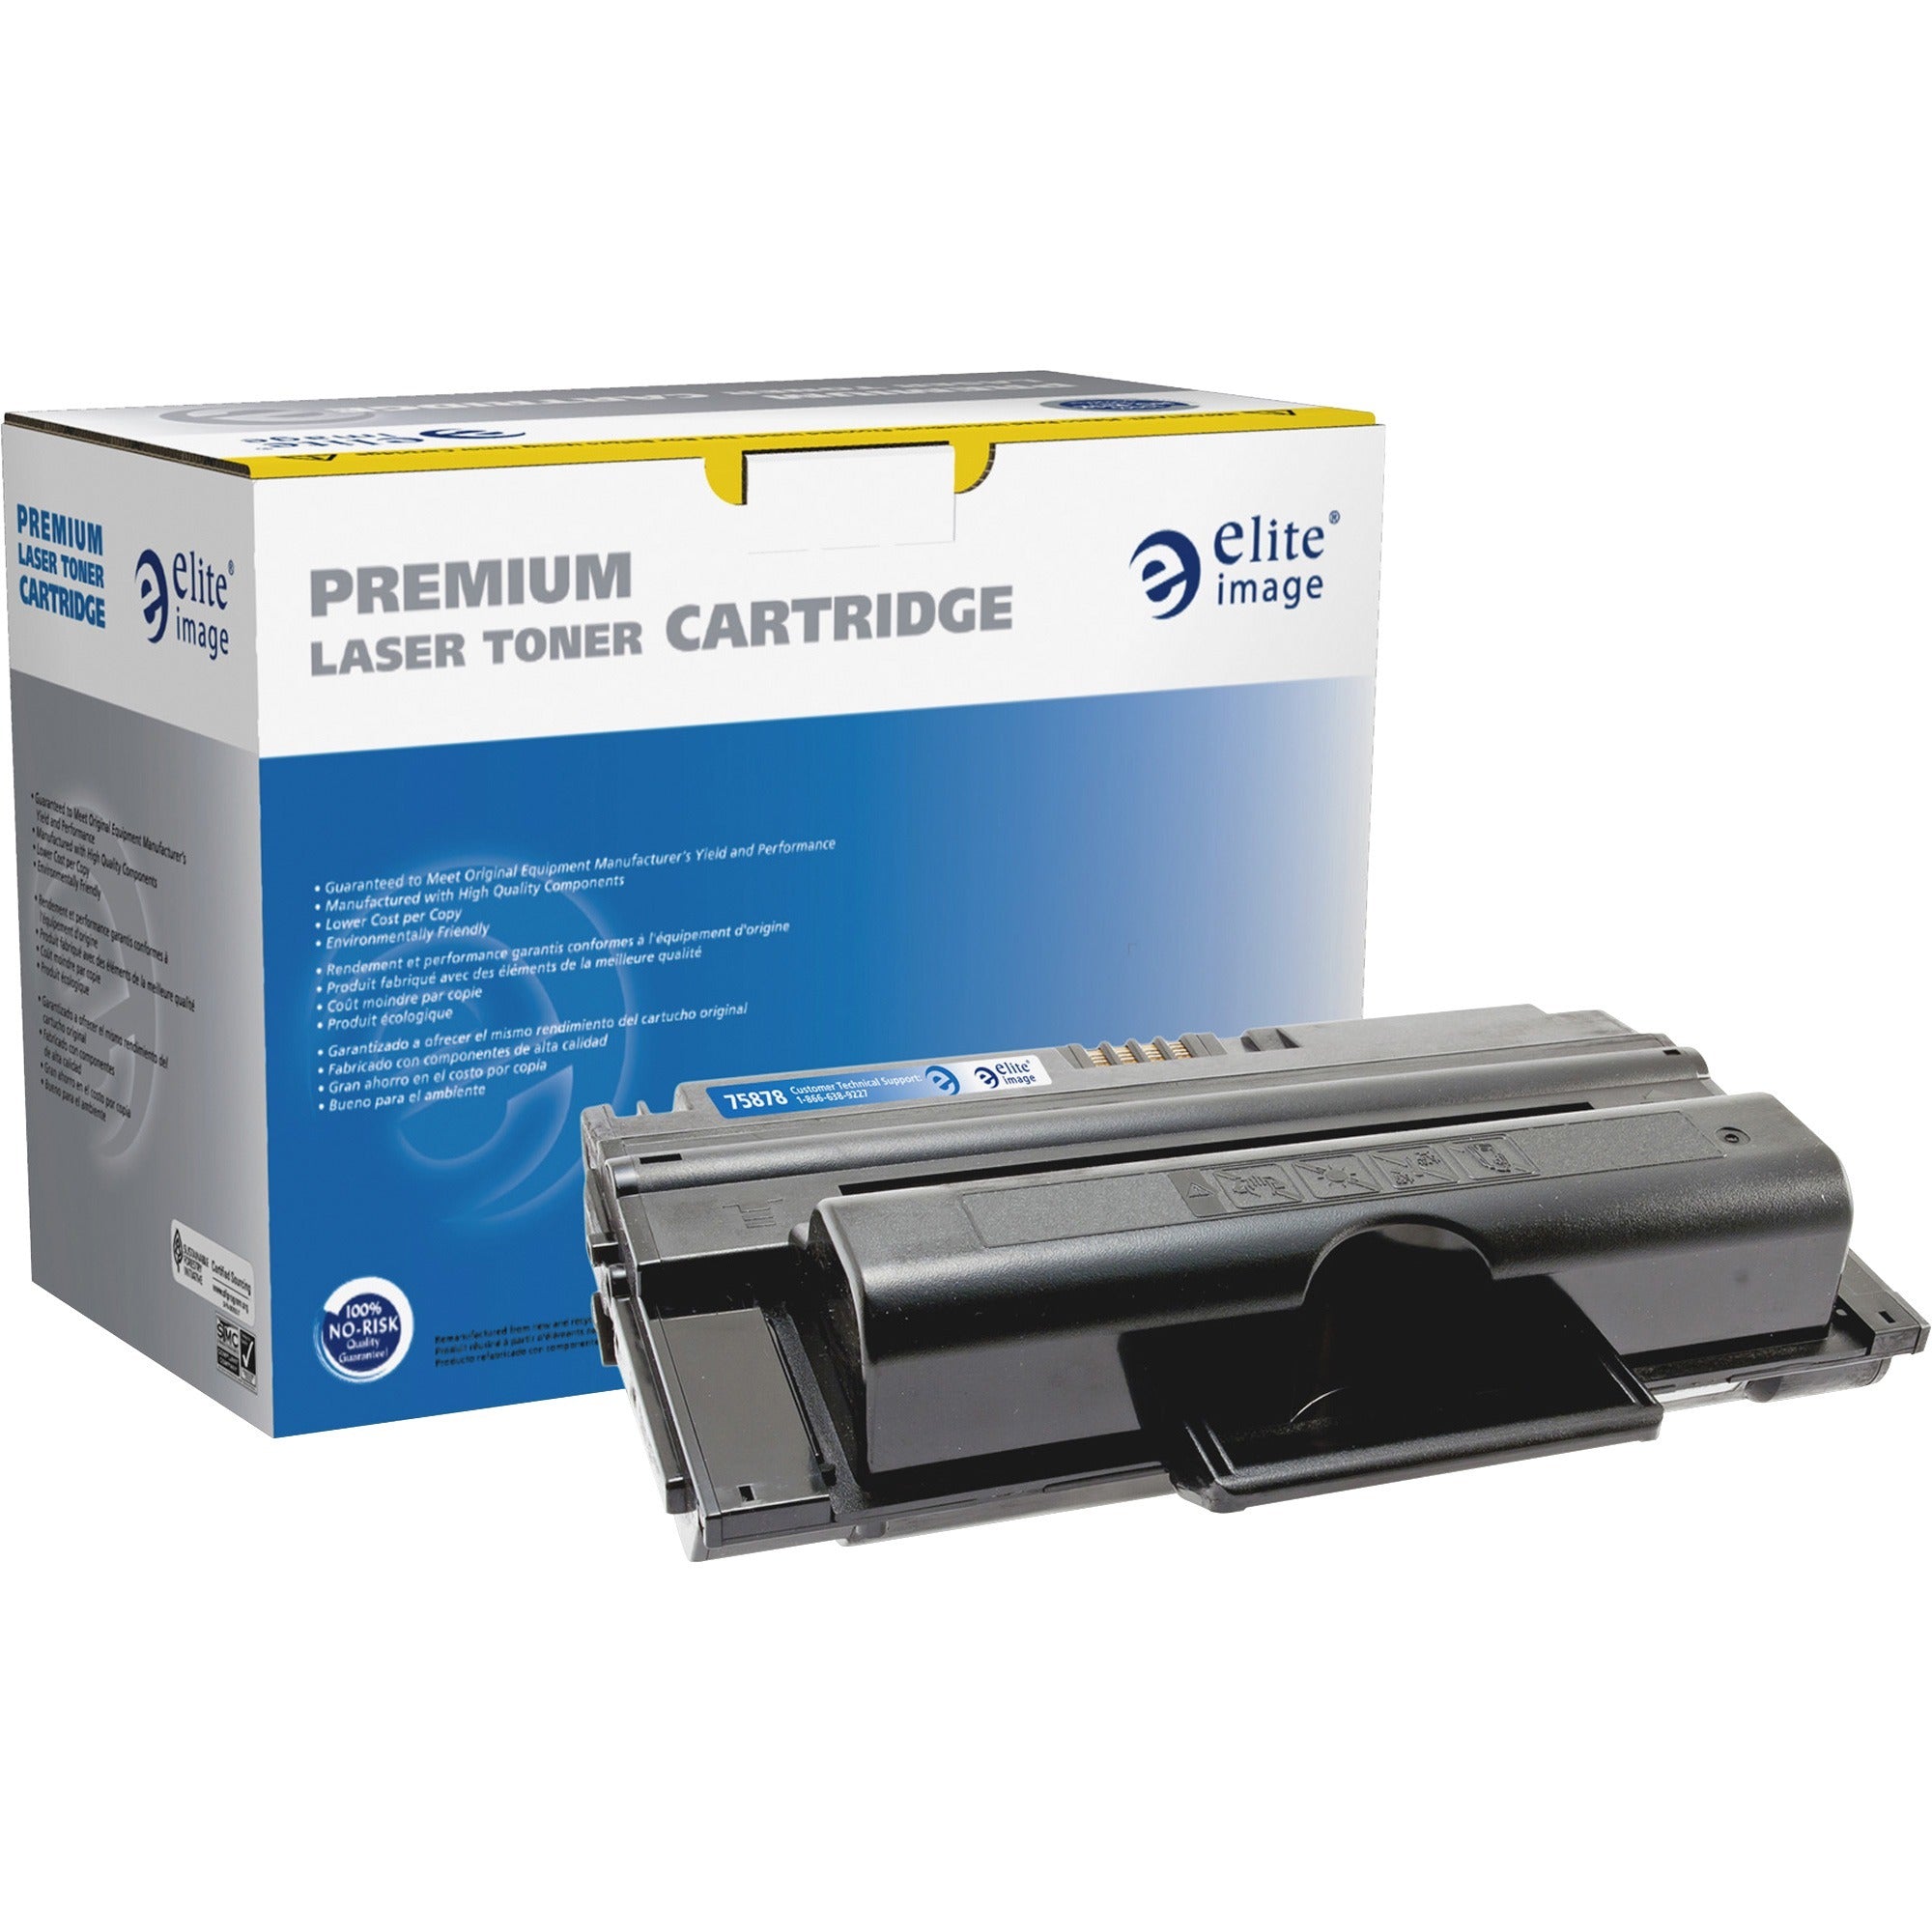 Elite Image Remanufactured Toner Cartridge - Alternative for Xerox (106R01530) - Laser - High Yield - Black - 11000 Pages - 1 Each - 1